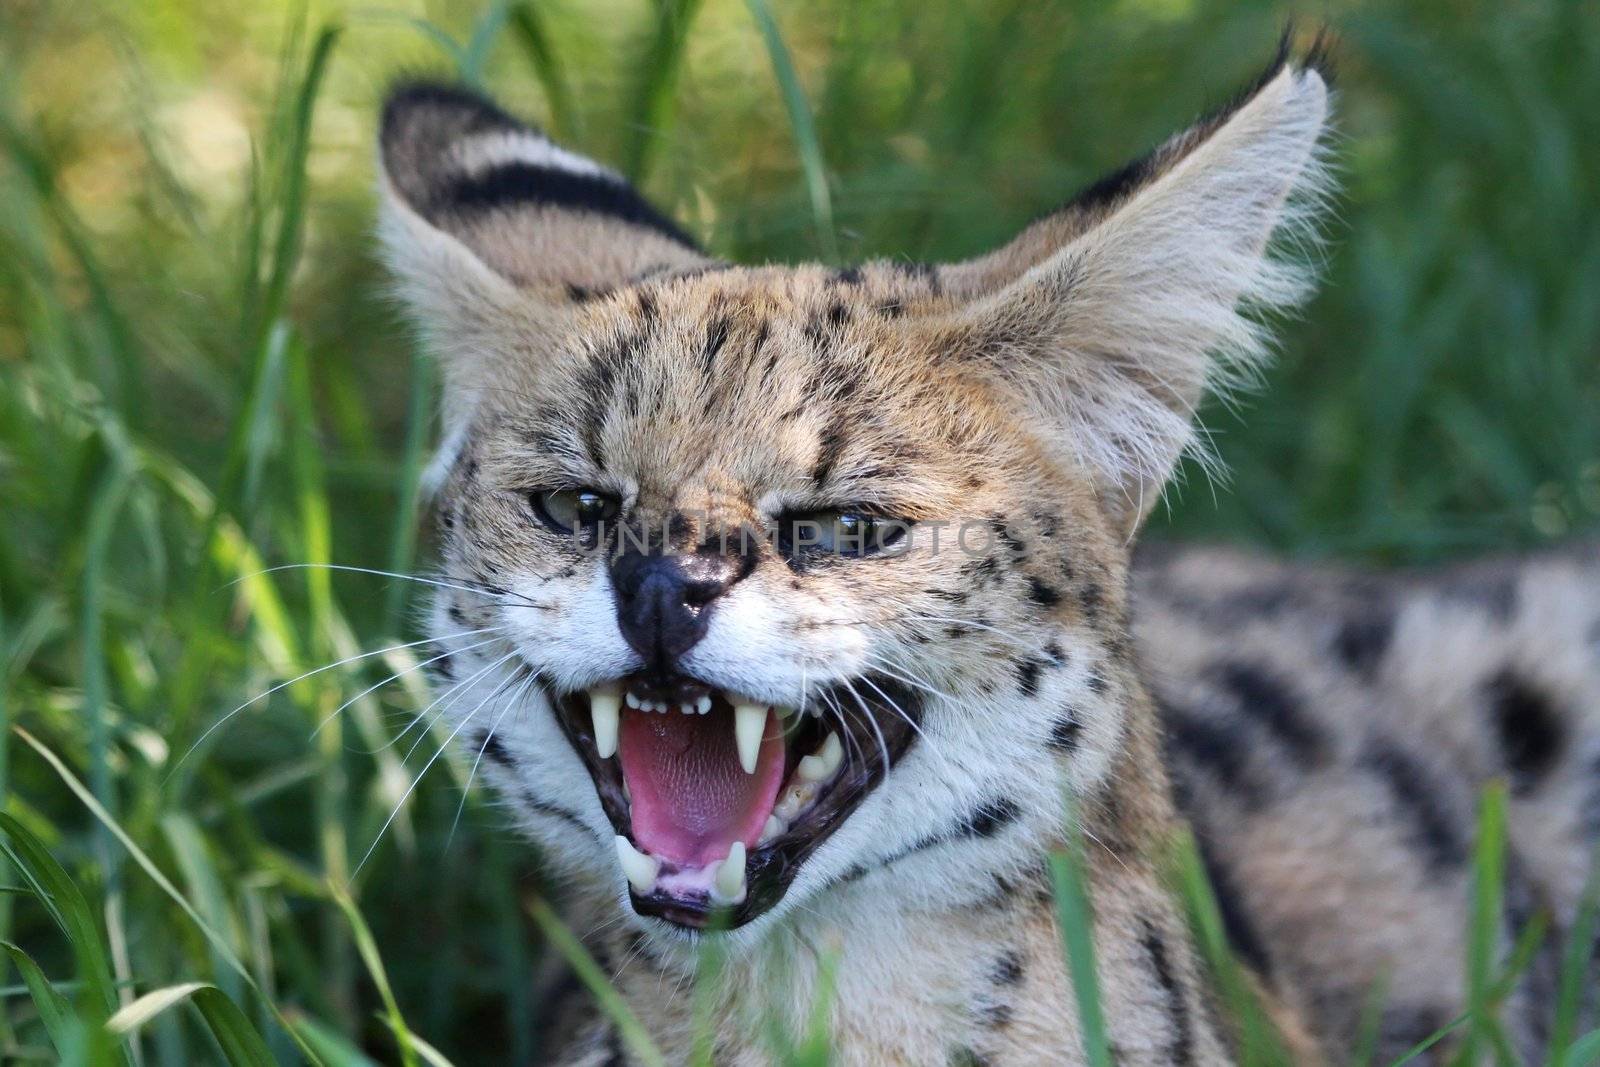 Snarling Serval wild cat with large teeth and pink tongue